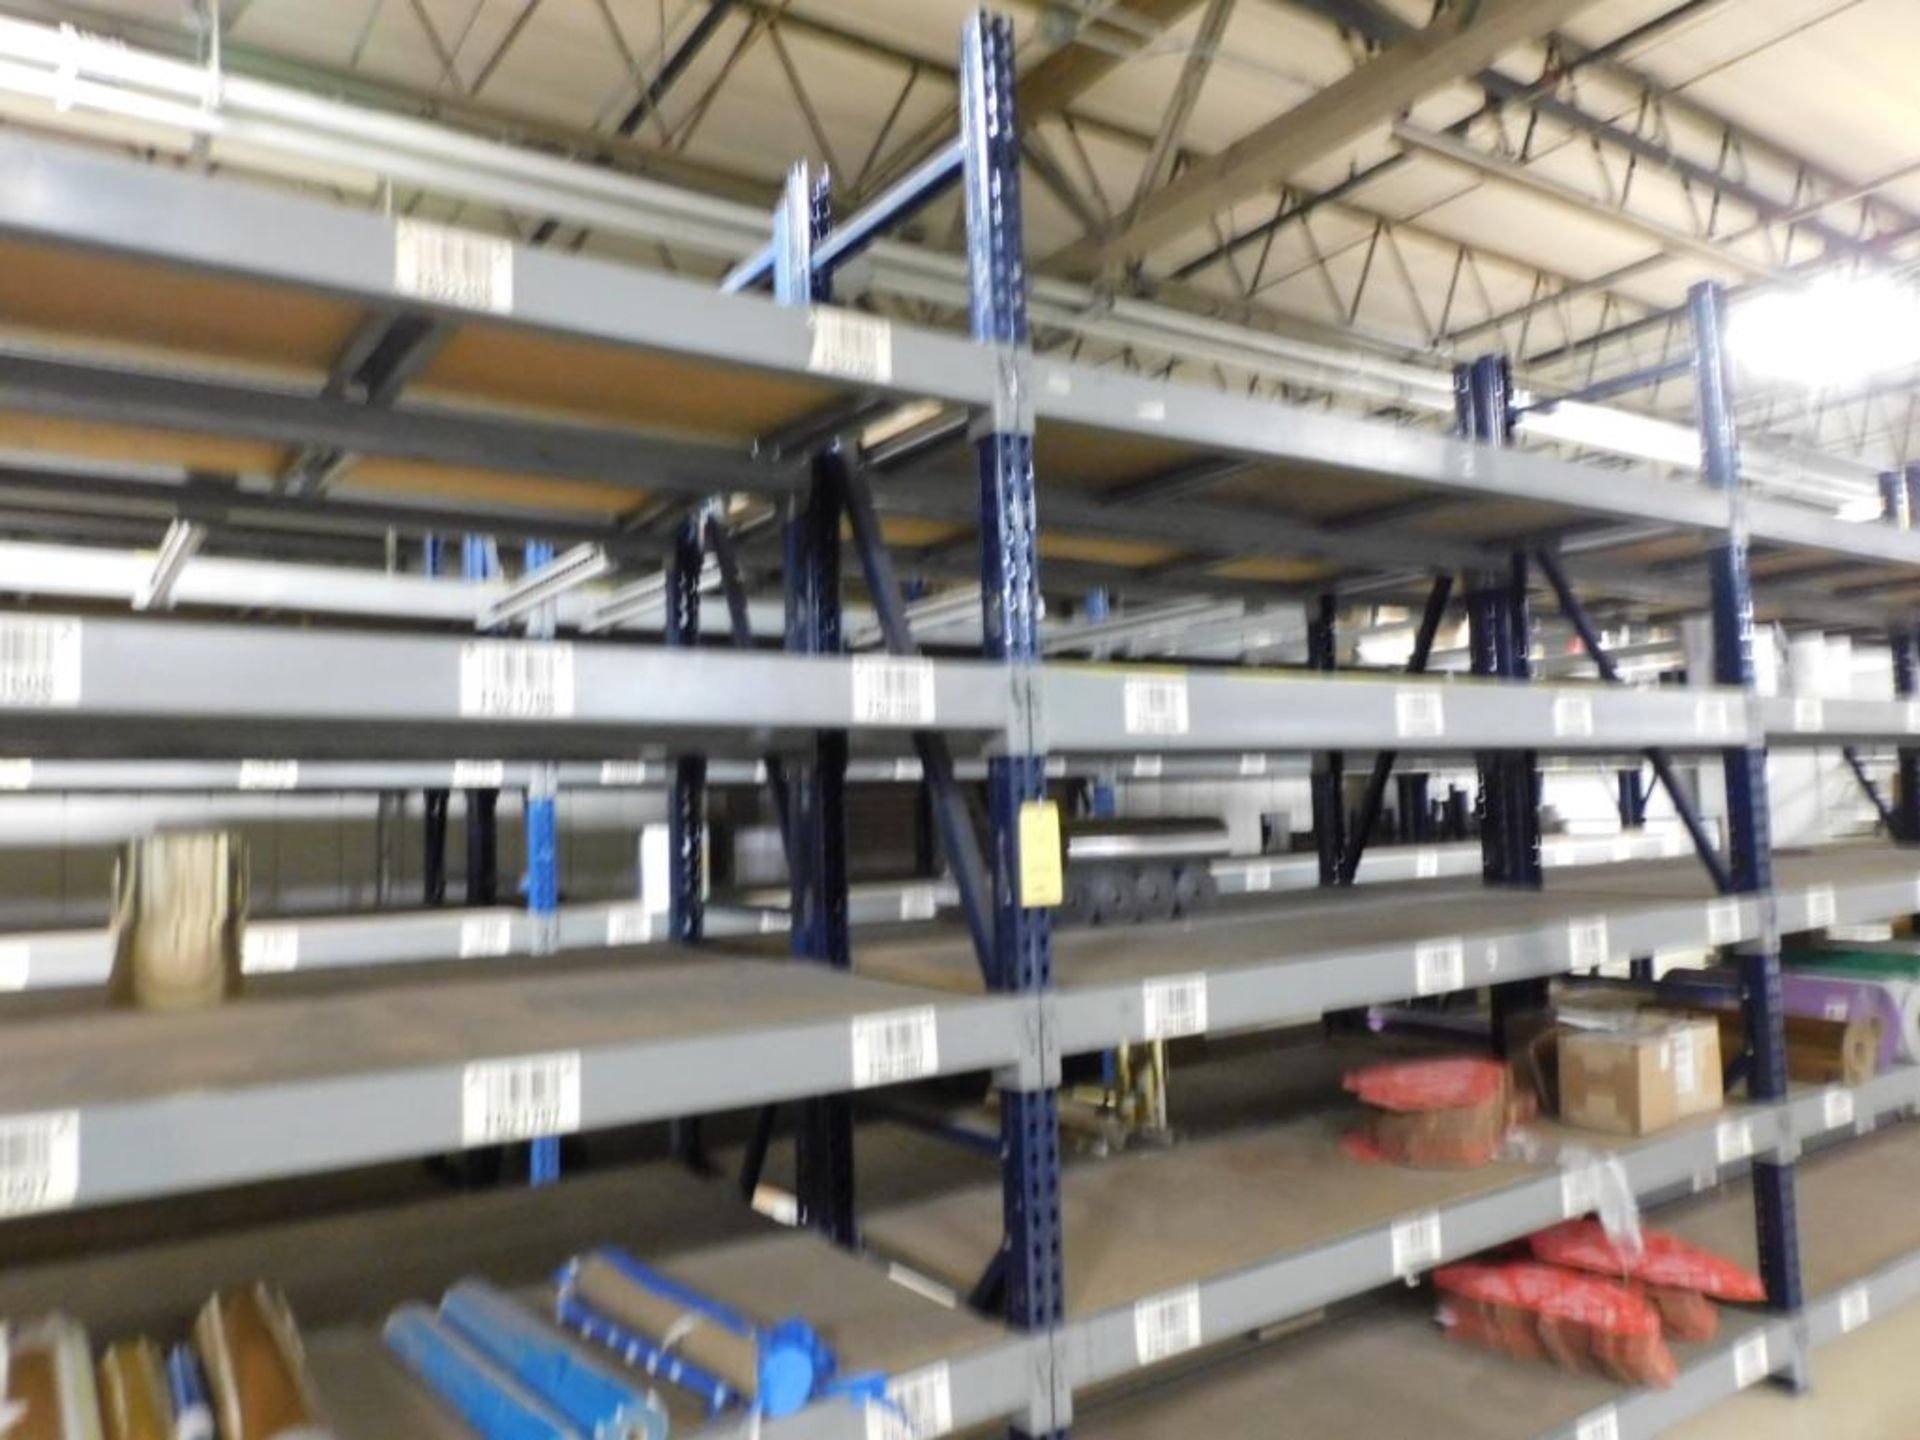 LOT: (24) Sections Pallet Racking w/(5) Shelves per Section, 10 ft. length x 30 in. Wide x 10 ft. Hi